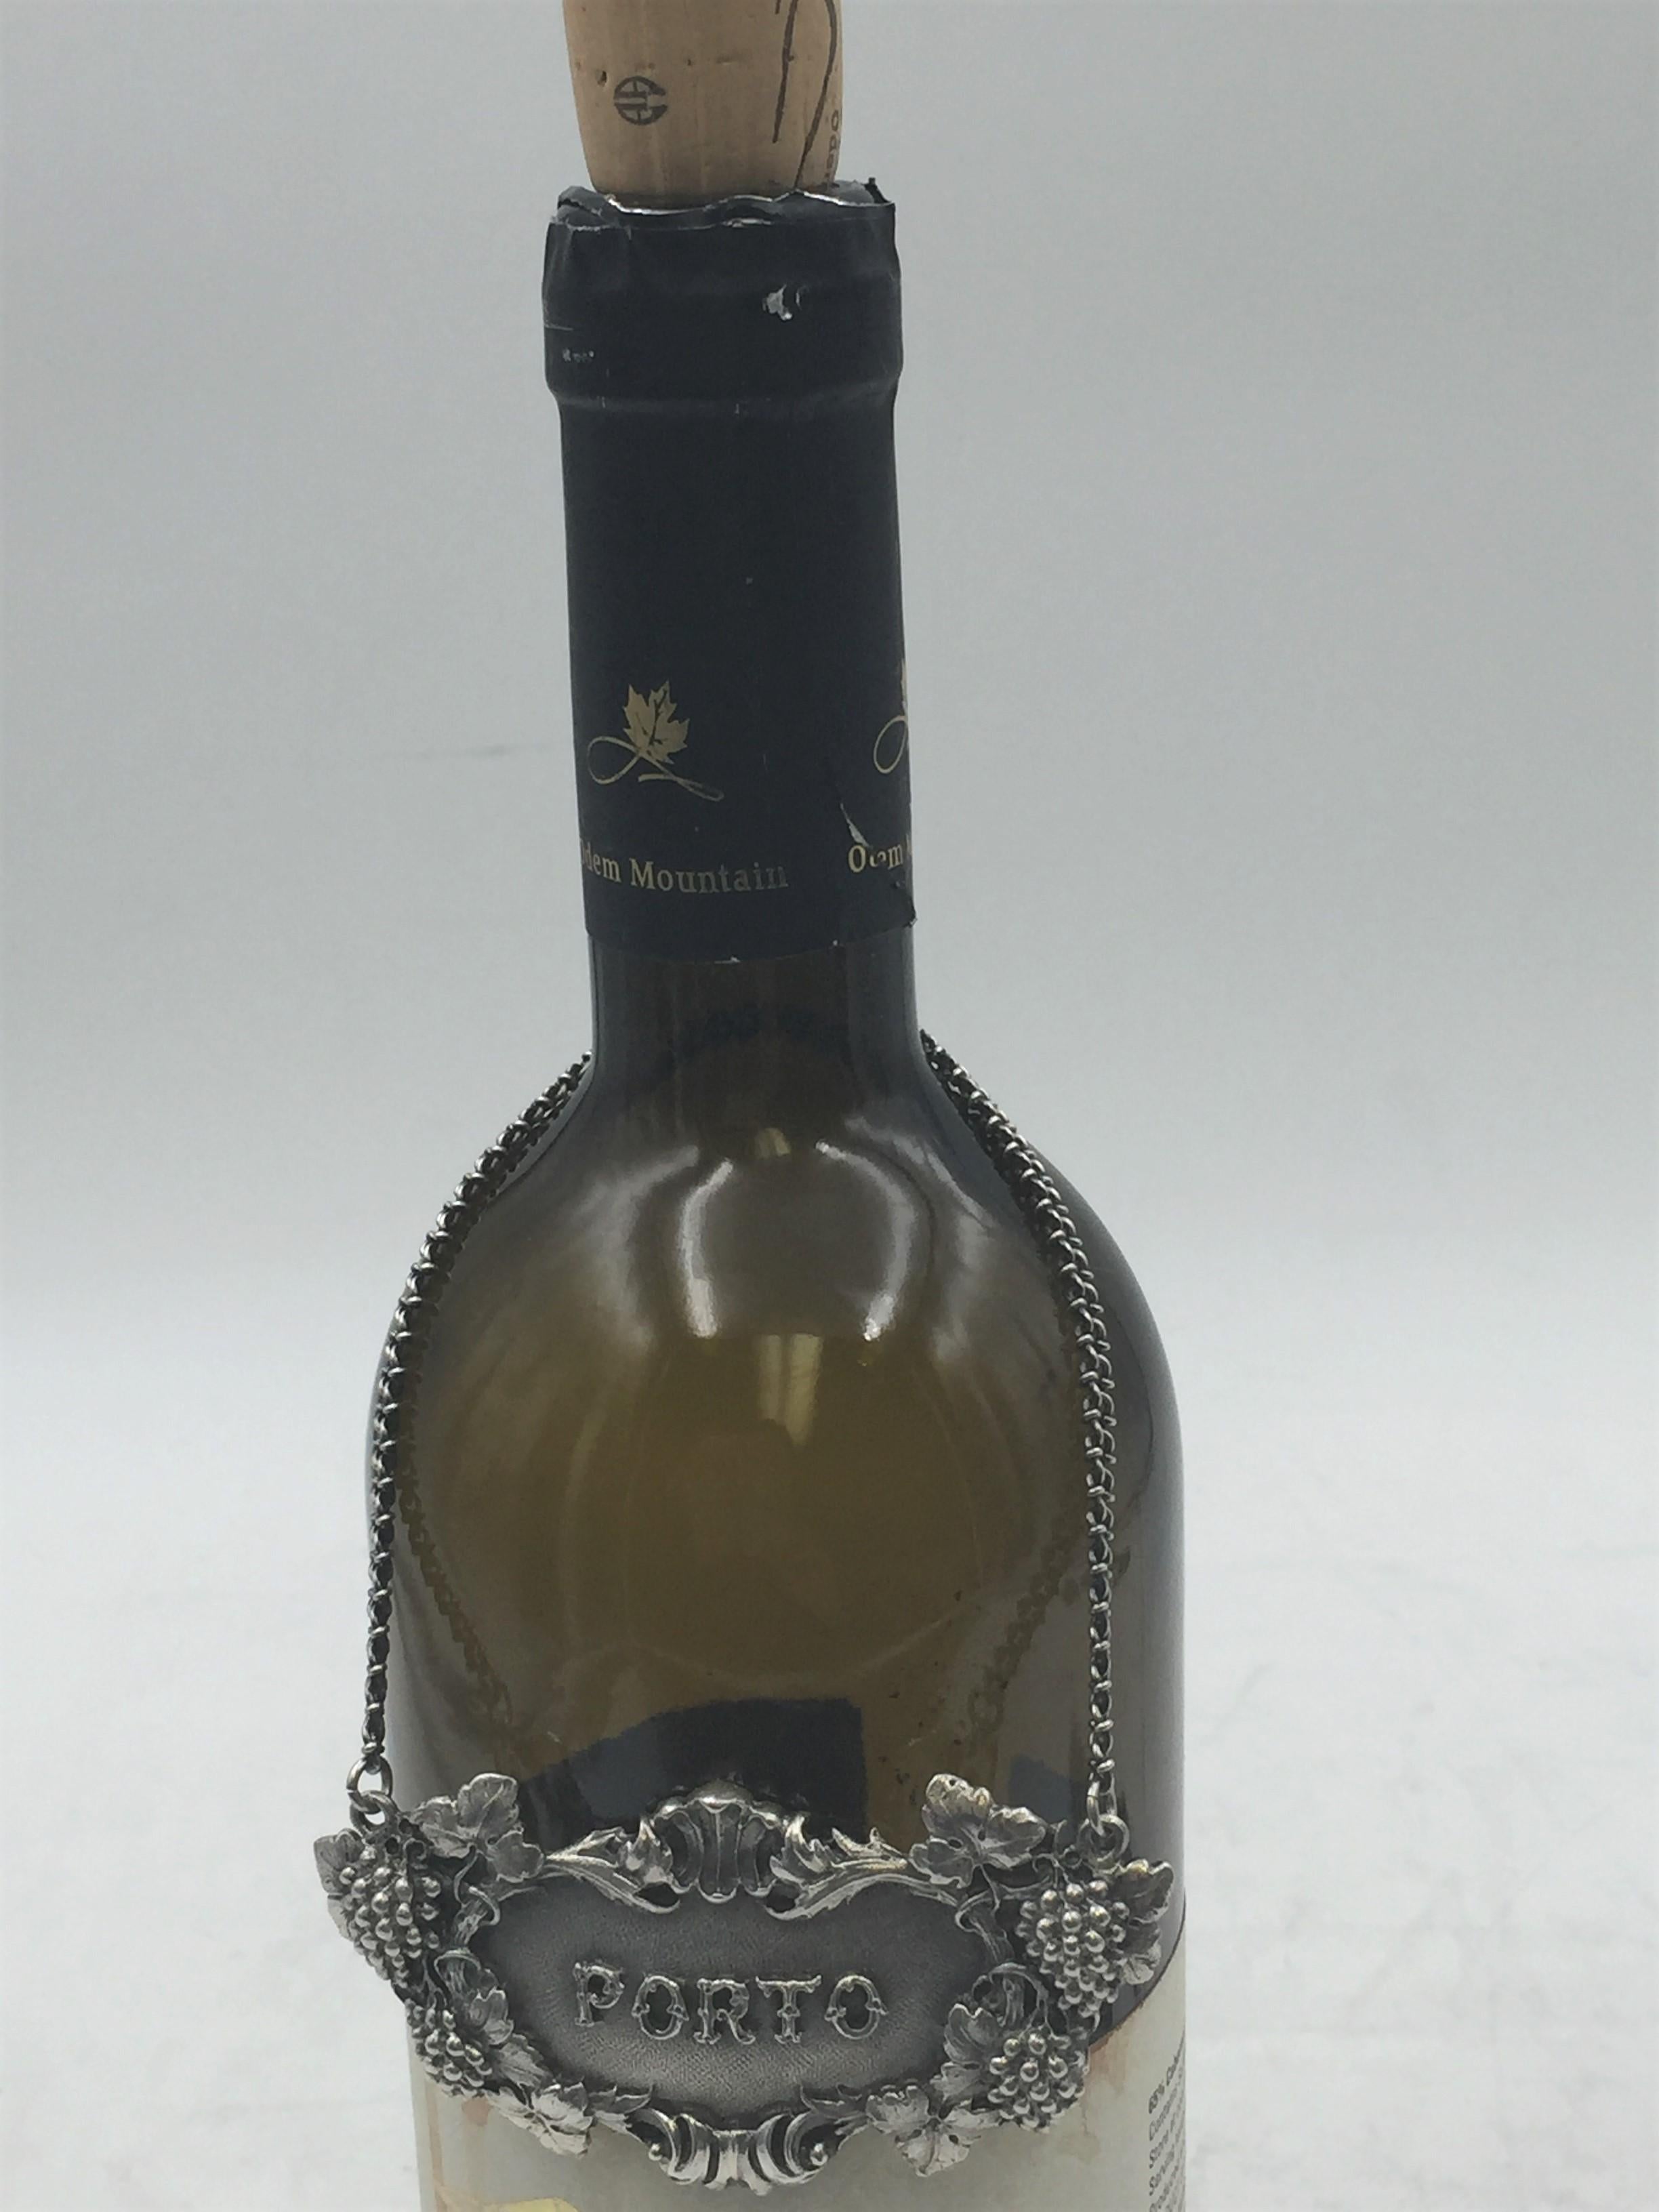 Rare 925 sterling silver claret jug labels label. PORTO embossed on the front in the center.

Marks on the back: Gianmaria Buccellati (signature and Italian maker's mark), ITALY, 925 (encircled silver purity mark).

Measure: Height: 3in x 2in;